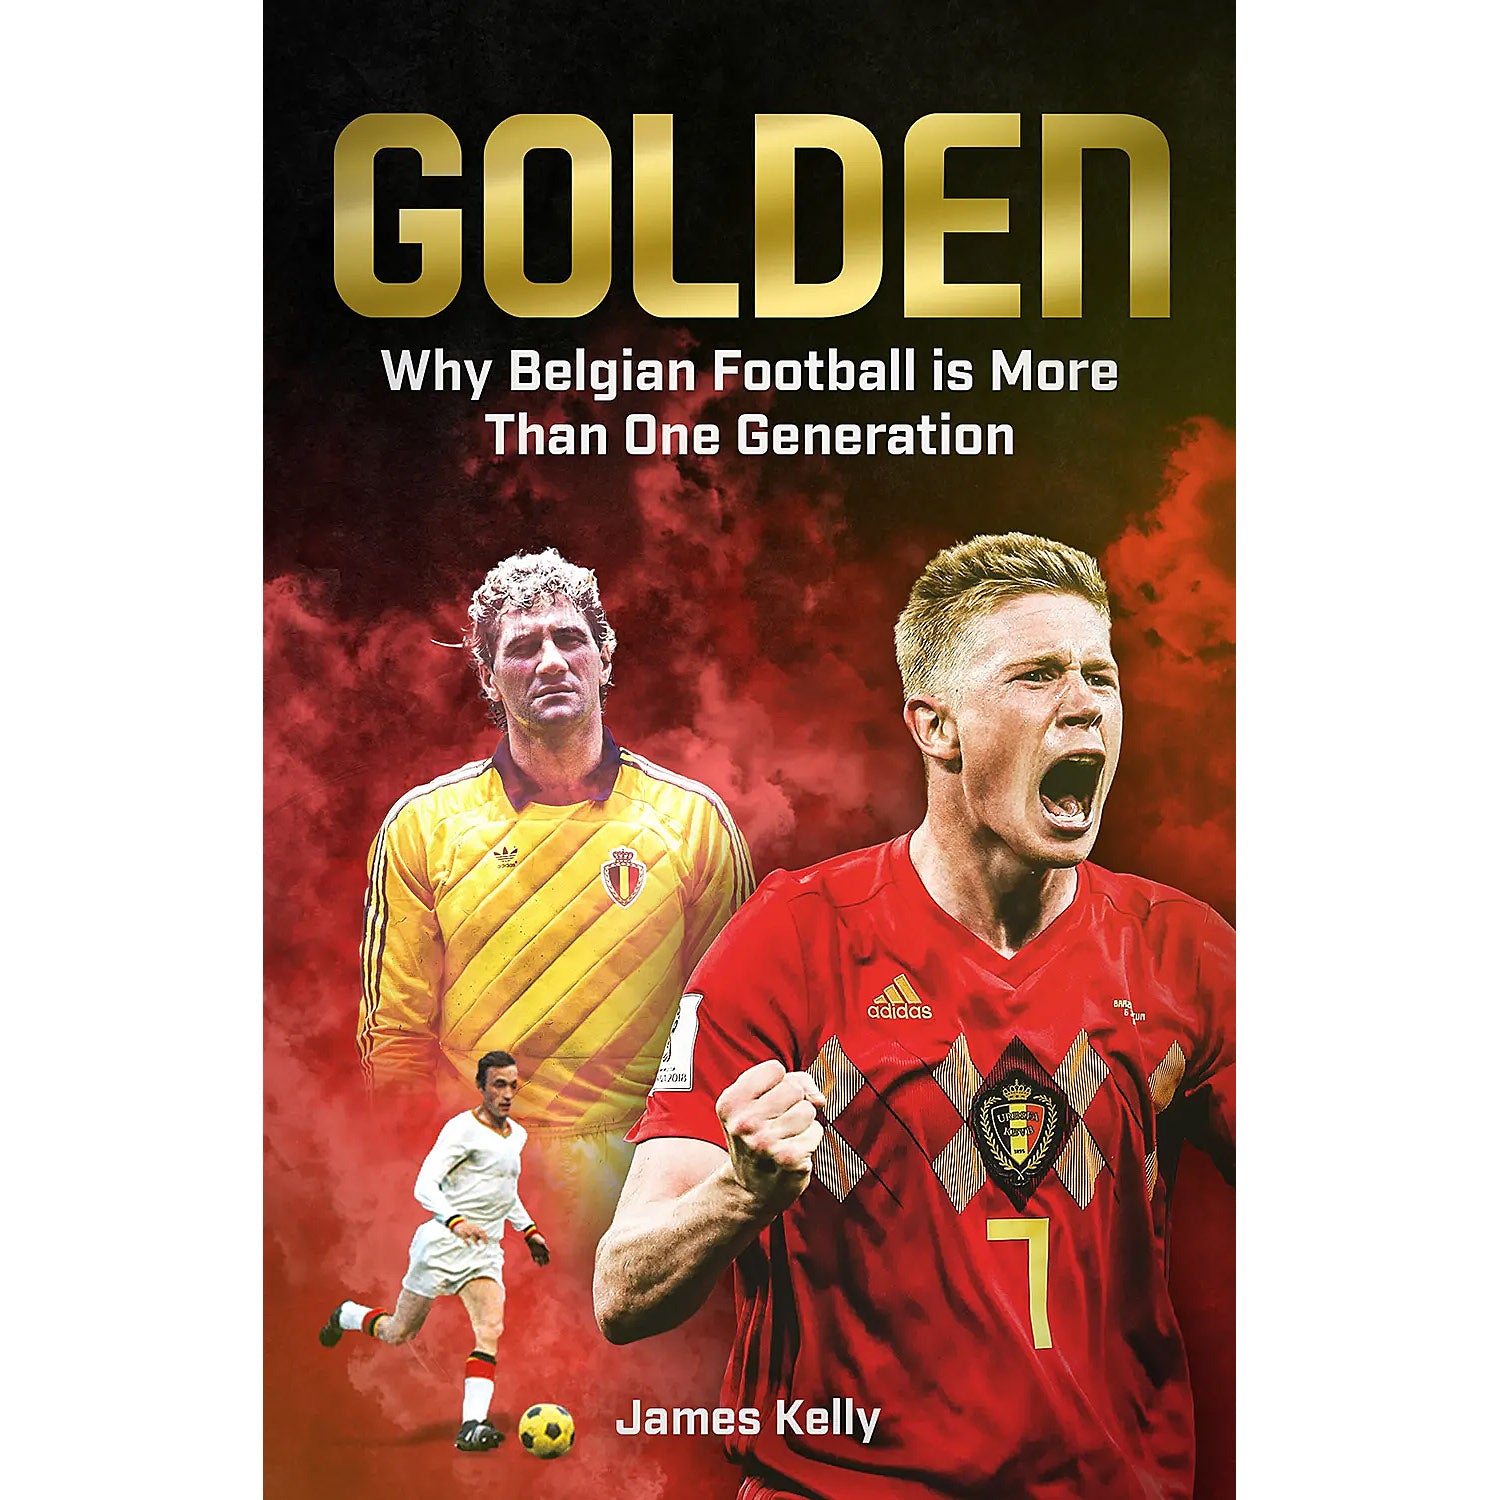 Golden – Why Belgian Football is More Than One Generation